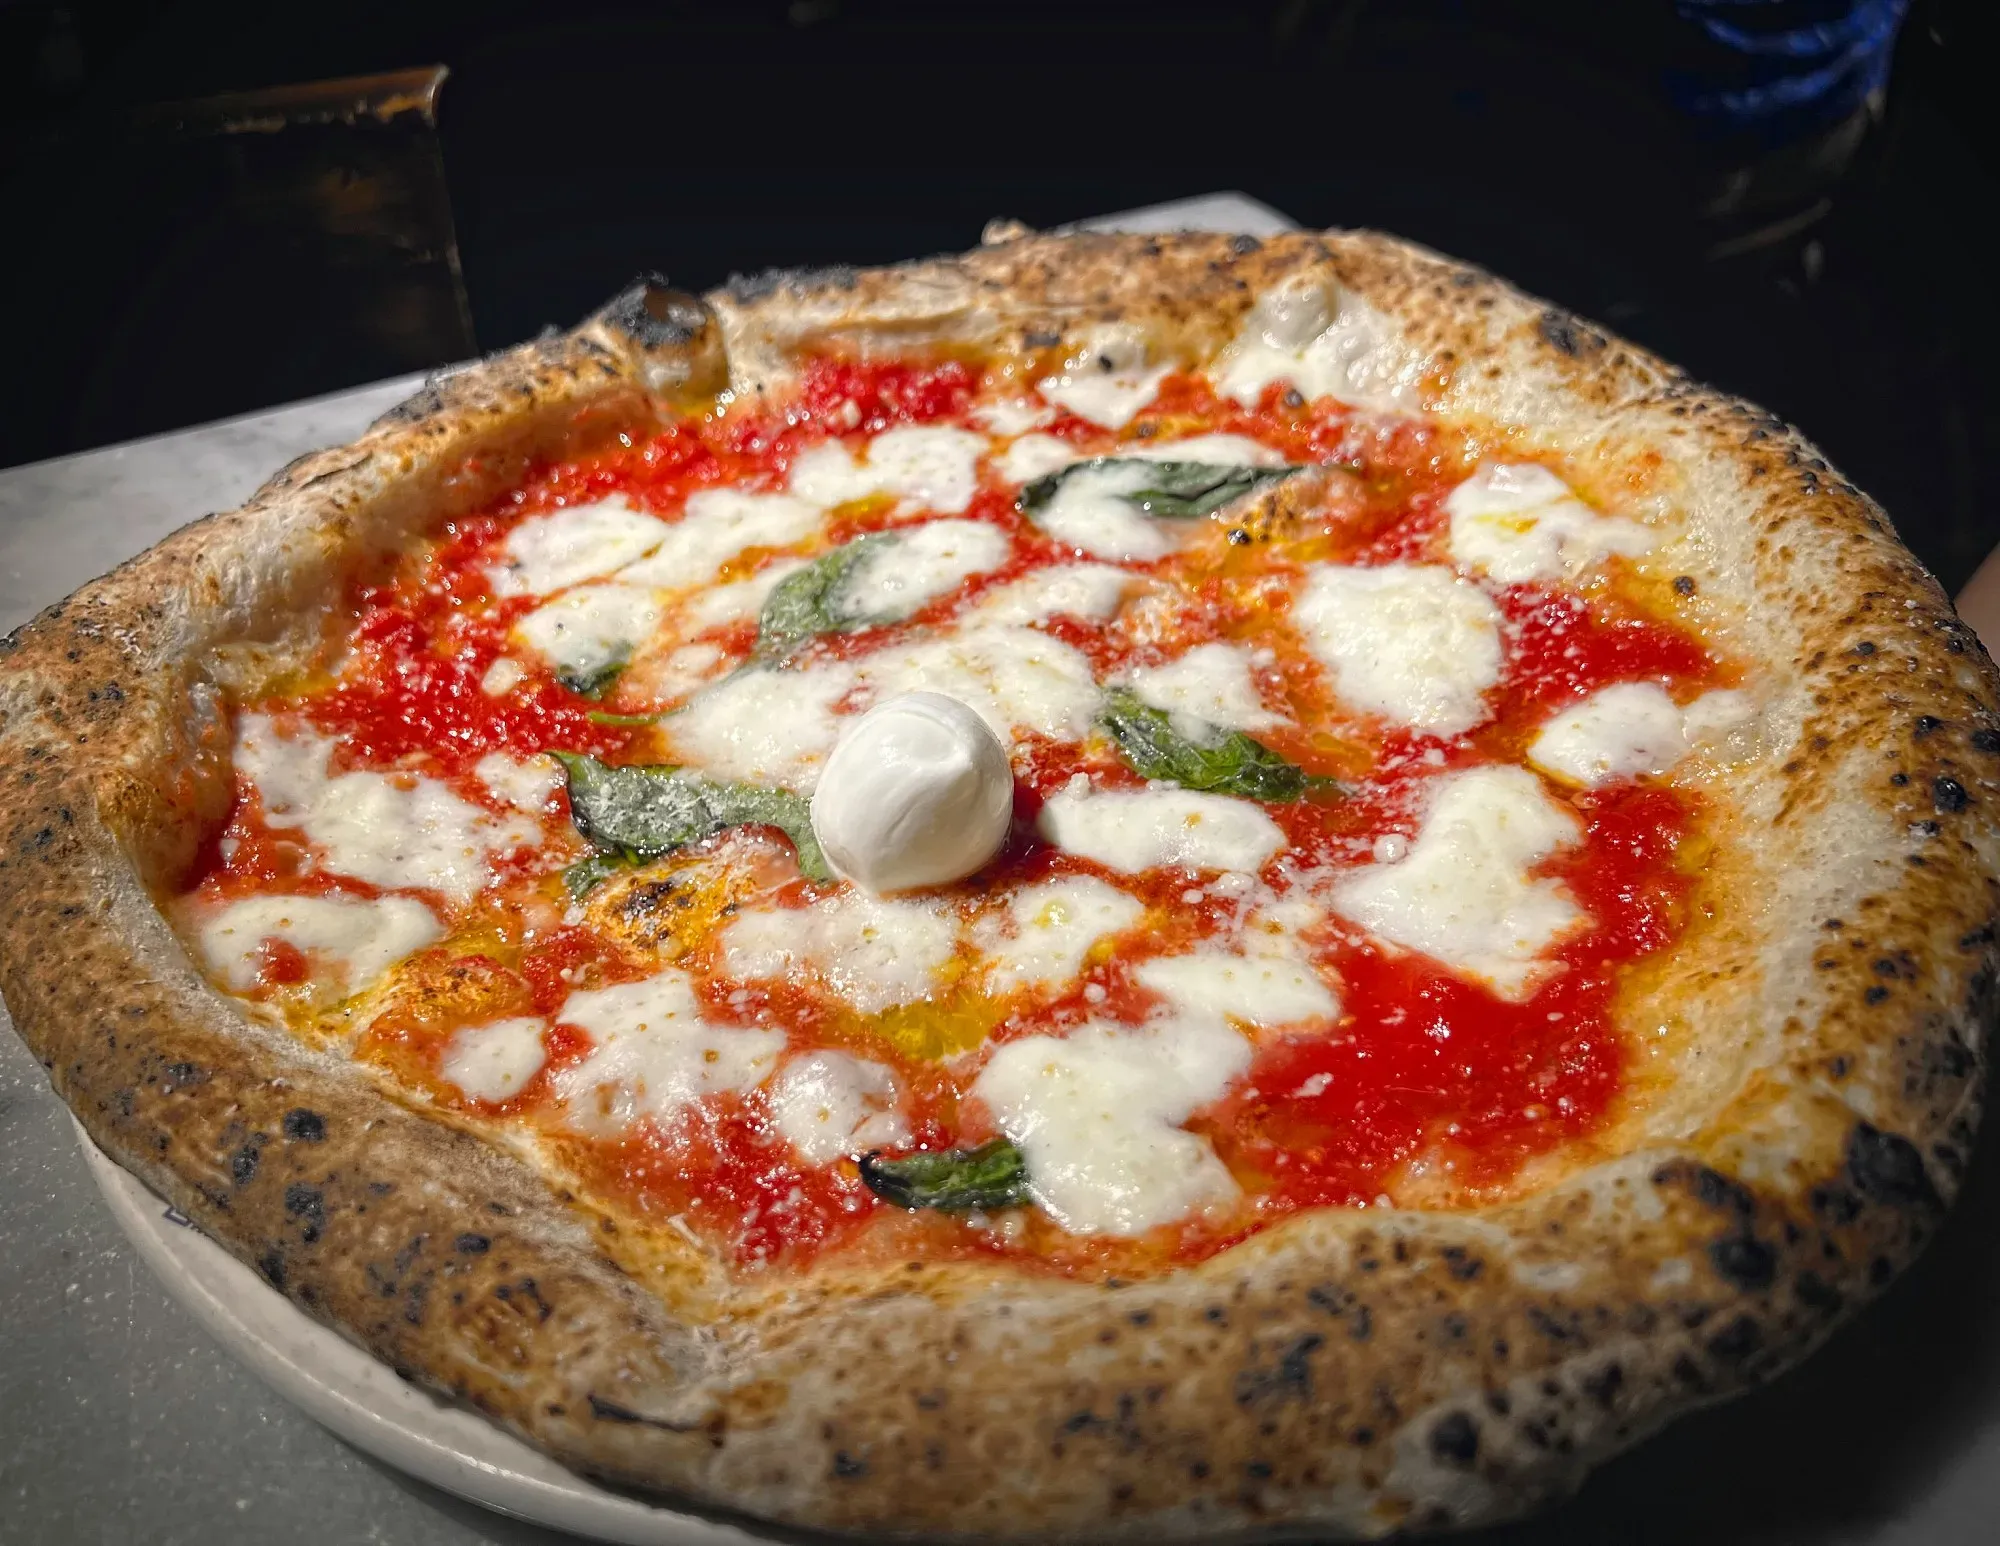 Neapolitan pizza. Low angle of a margherita pizza with a ball of mozzarella in the middle.